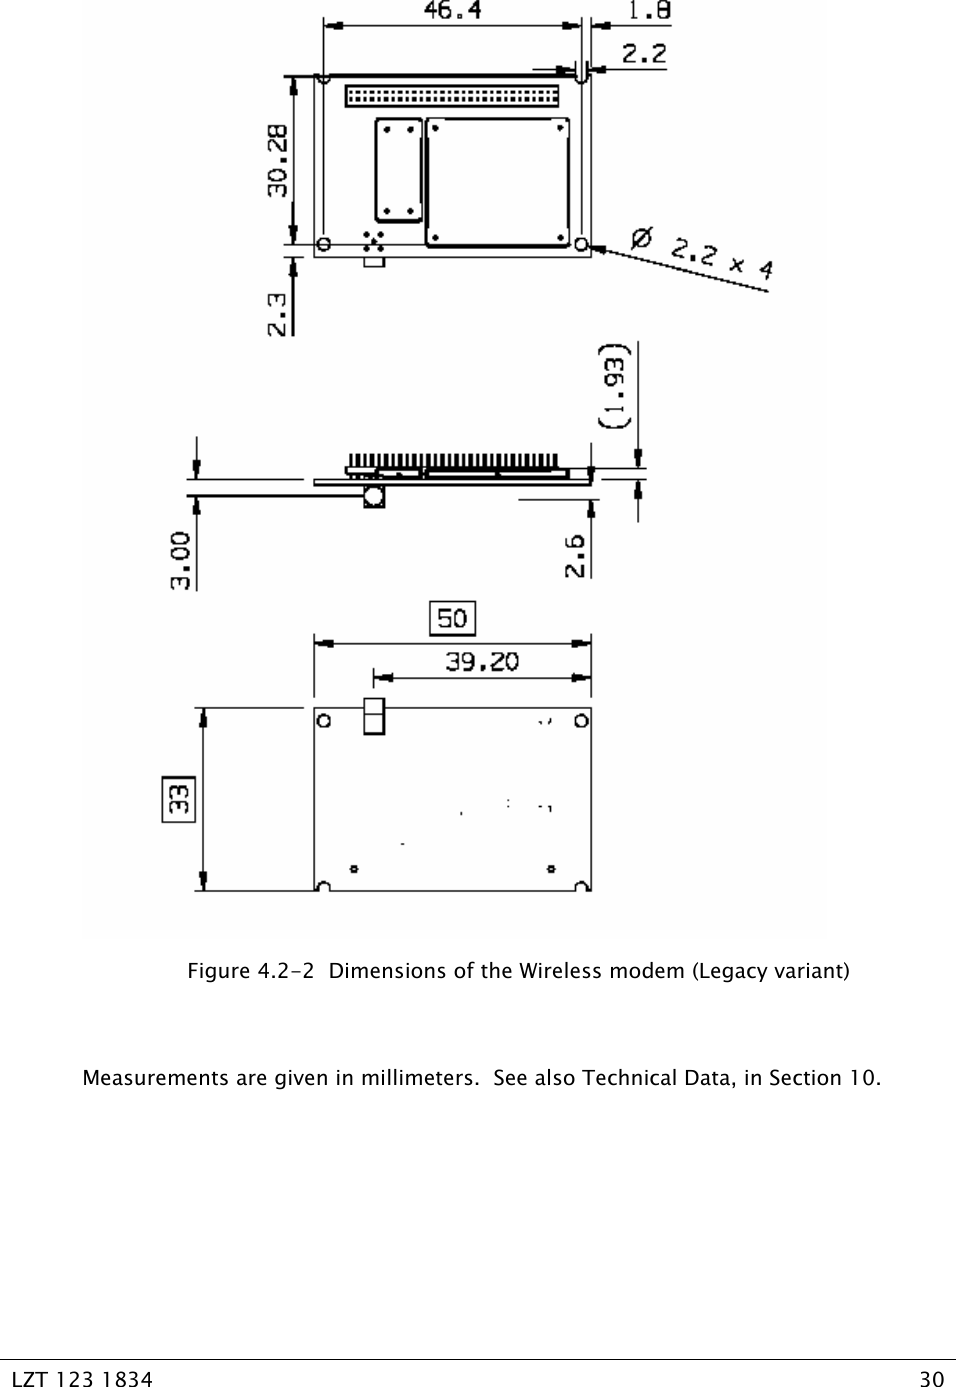   LZT 123 1834  30    Figure 4.2-2  Dimensions of the Wireless modem (Legacy variant)  Measurements are given in millimeters.  See also Technical Data, in Section 10. 